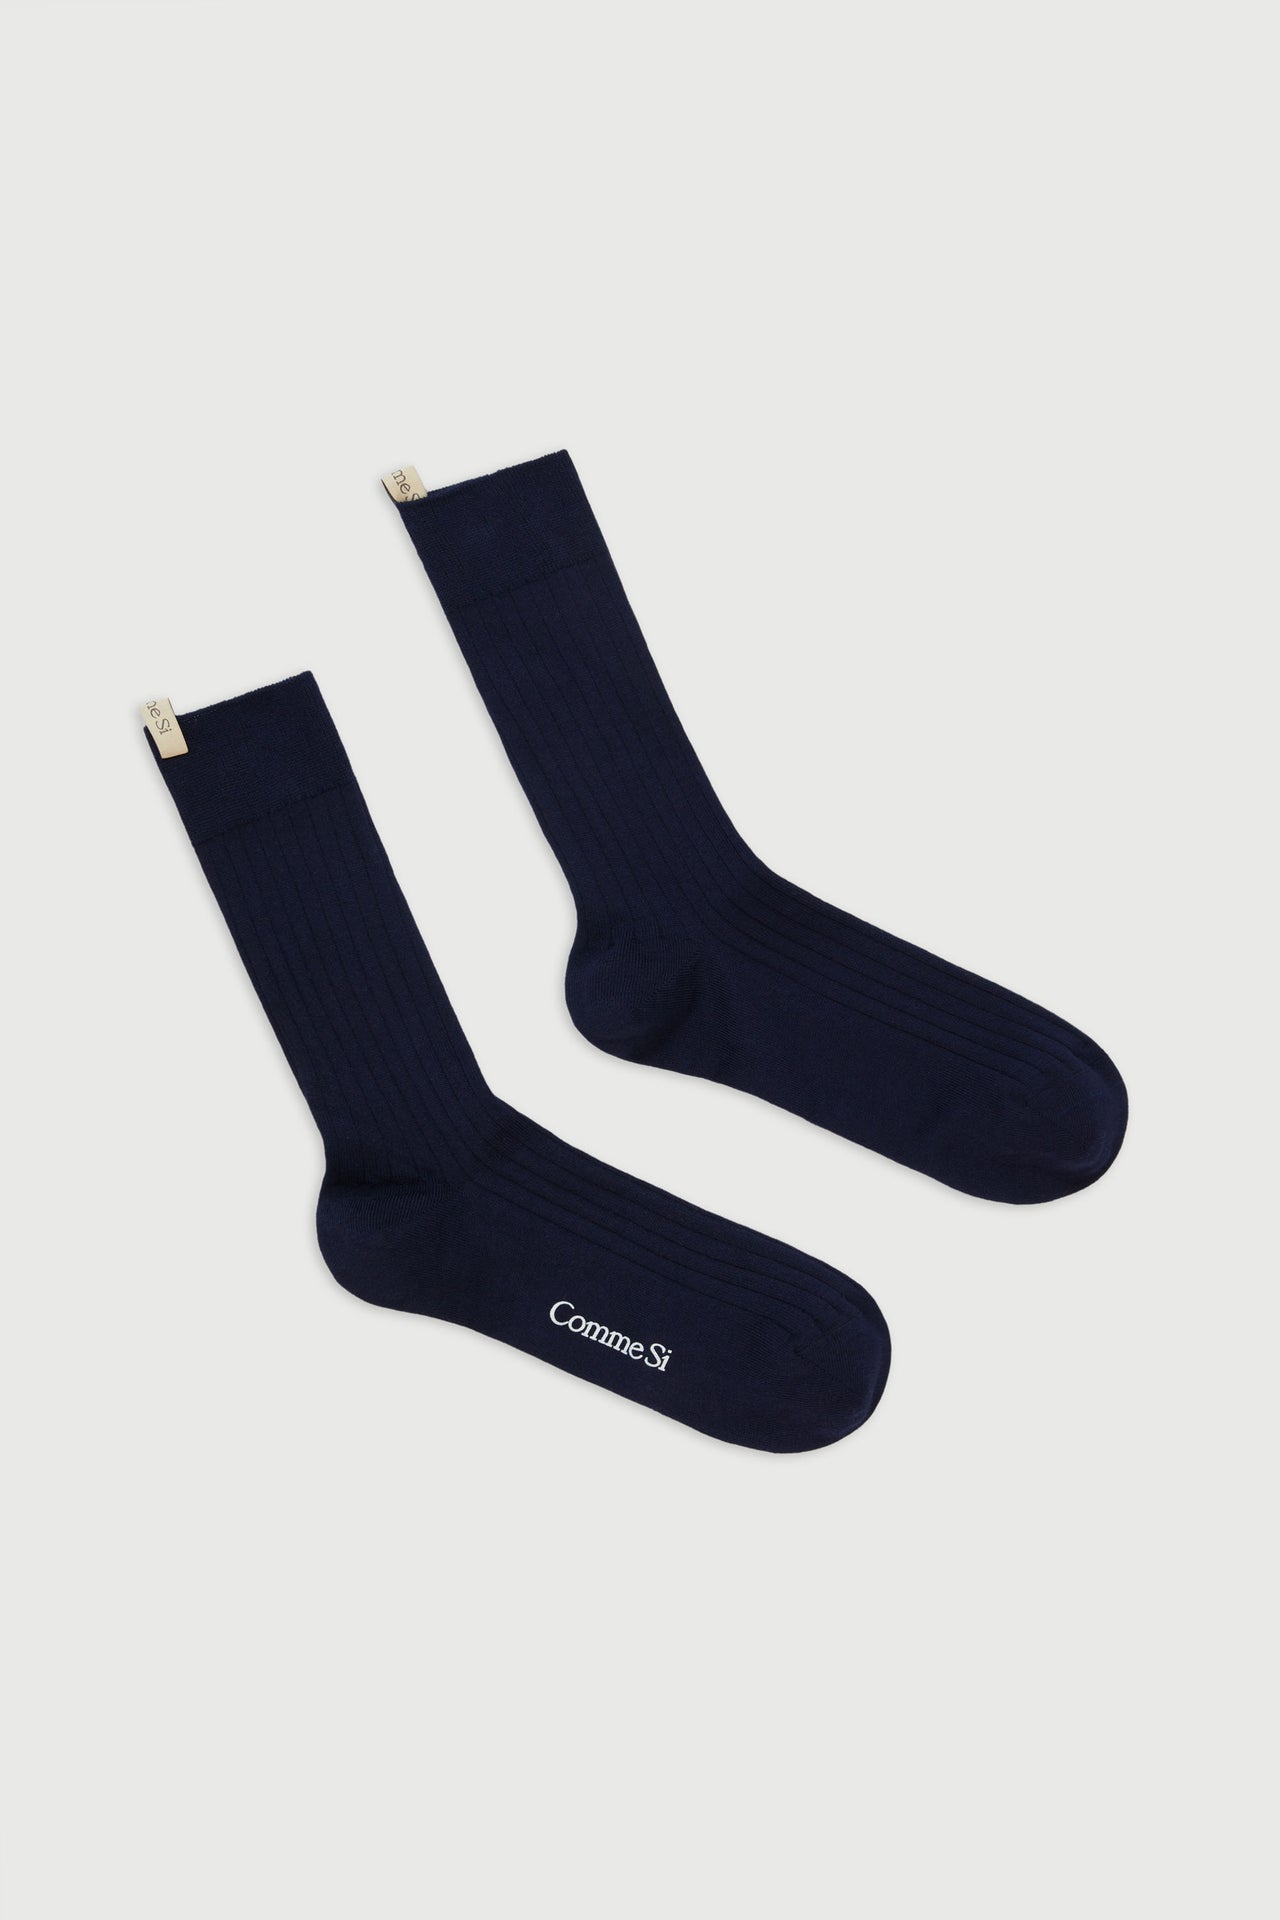 Comme Si - Socks